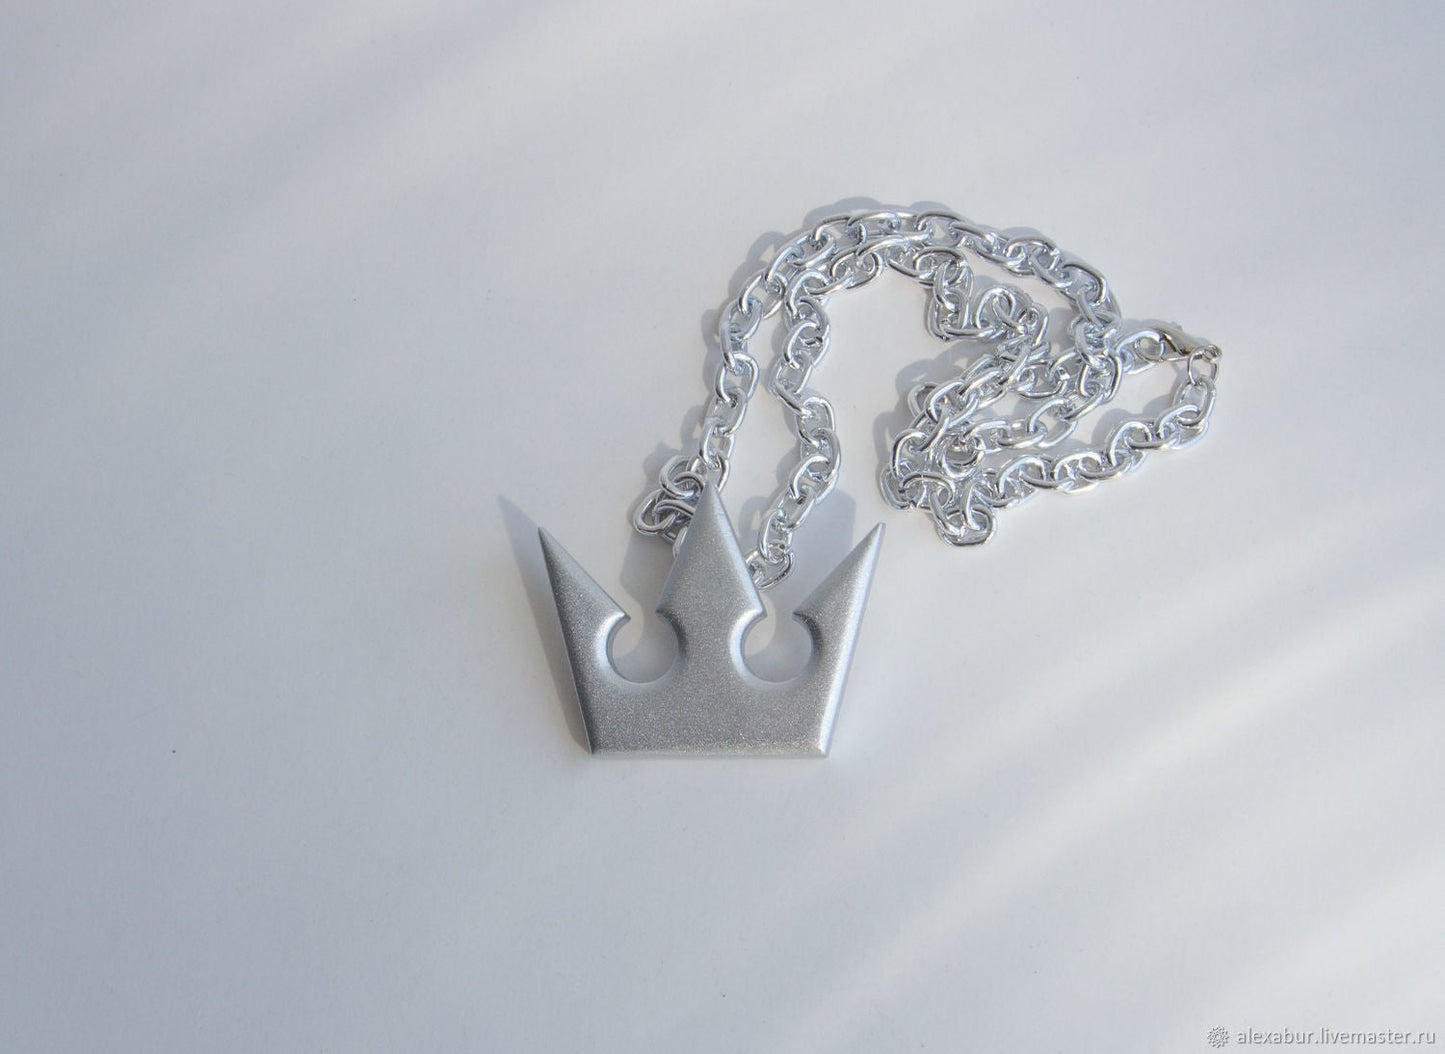 Kingdom Hearts inspired Sora Necklace | 3D printed Replica | kh3 | 3D printed Cosplay Props | Video Game Character